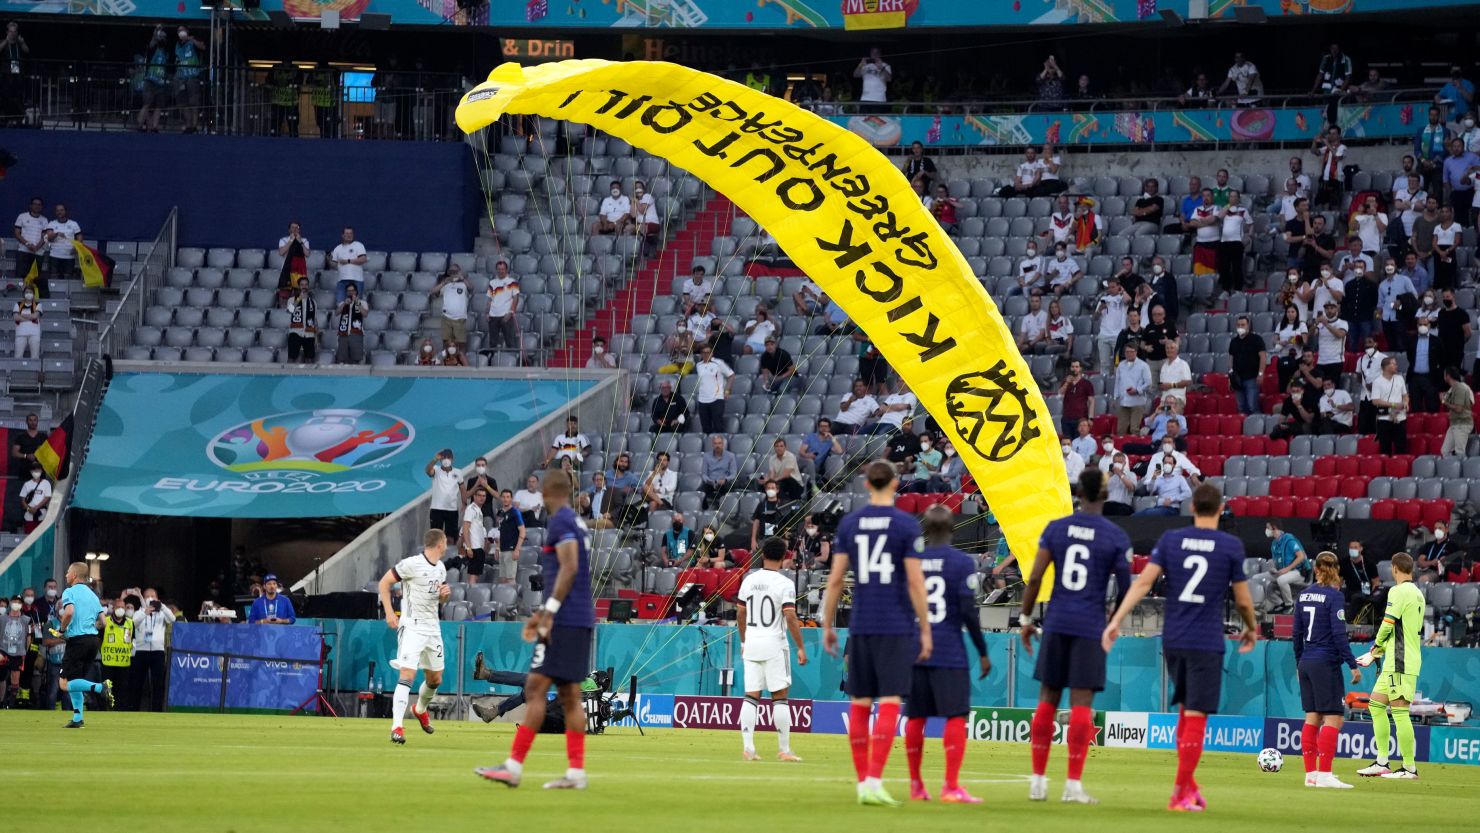 A protester parachuted onto the pitch before the Euro 2020 game between France and Germany.